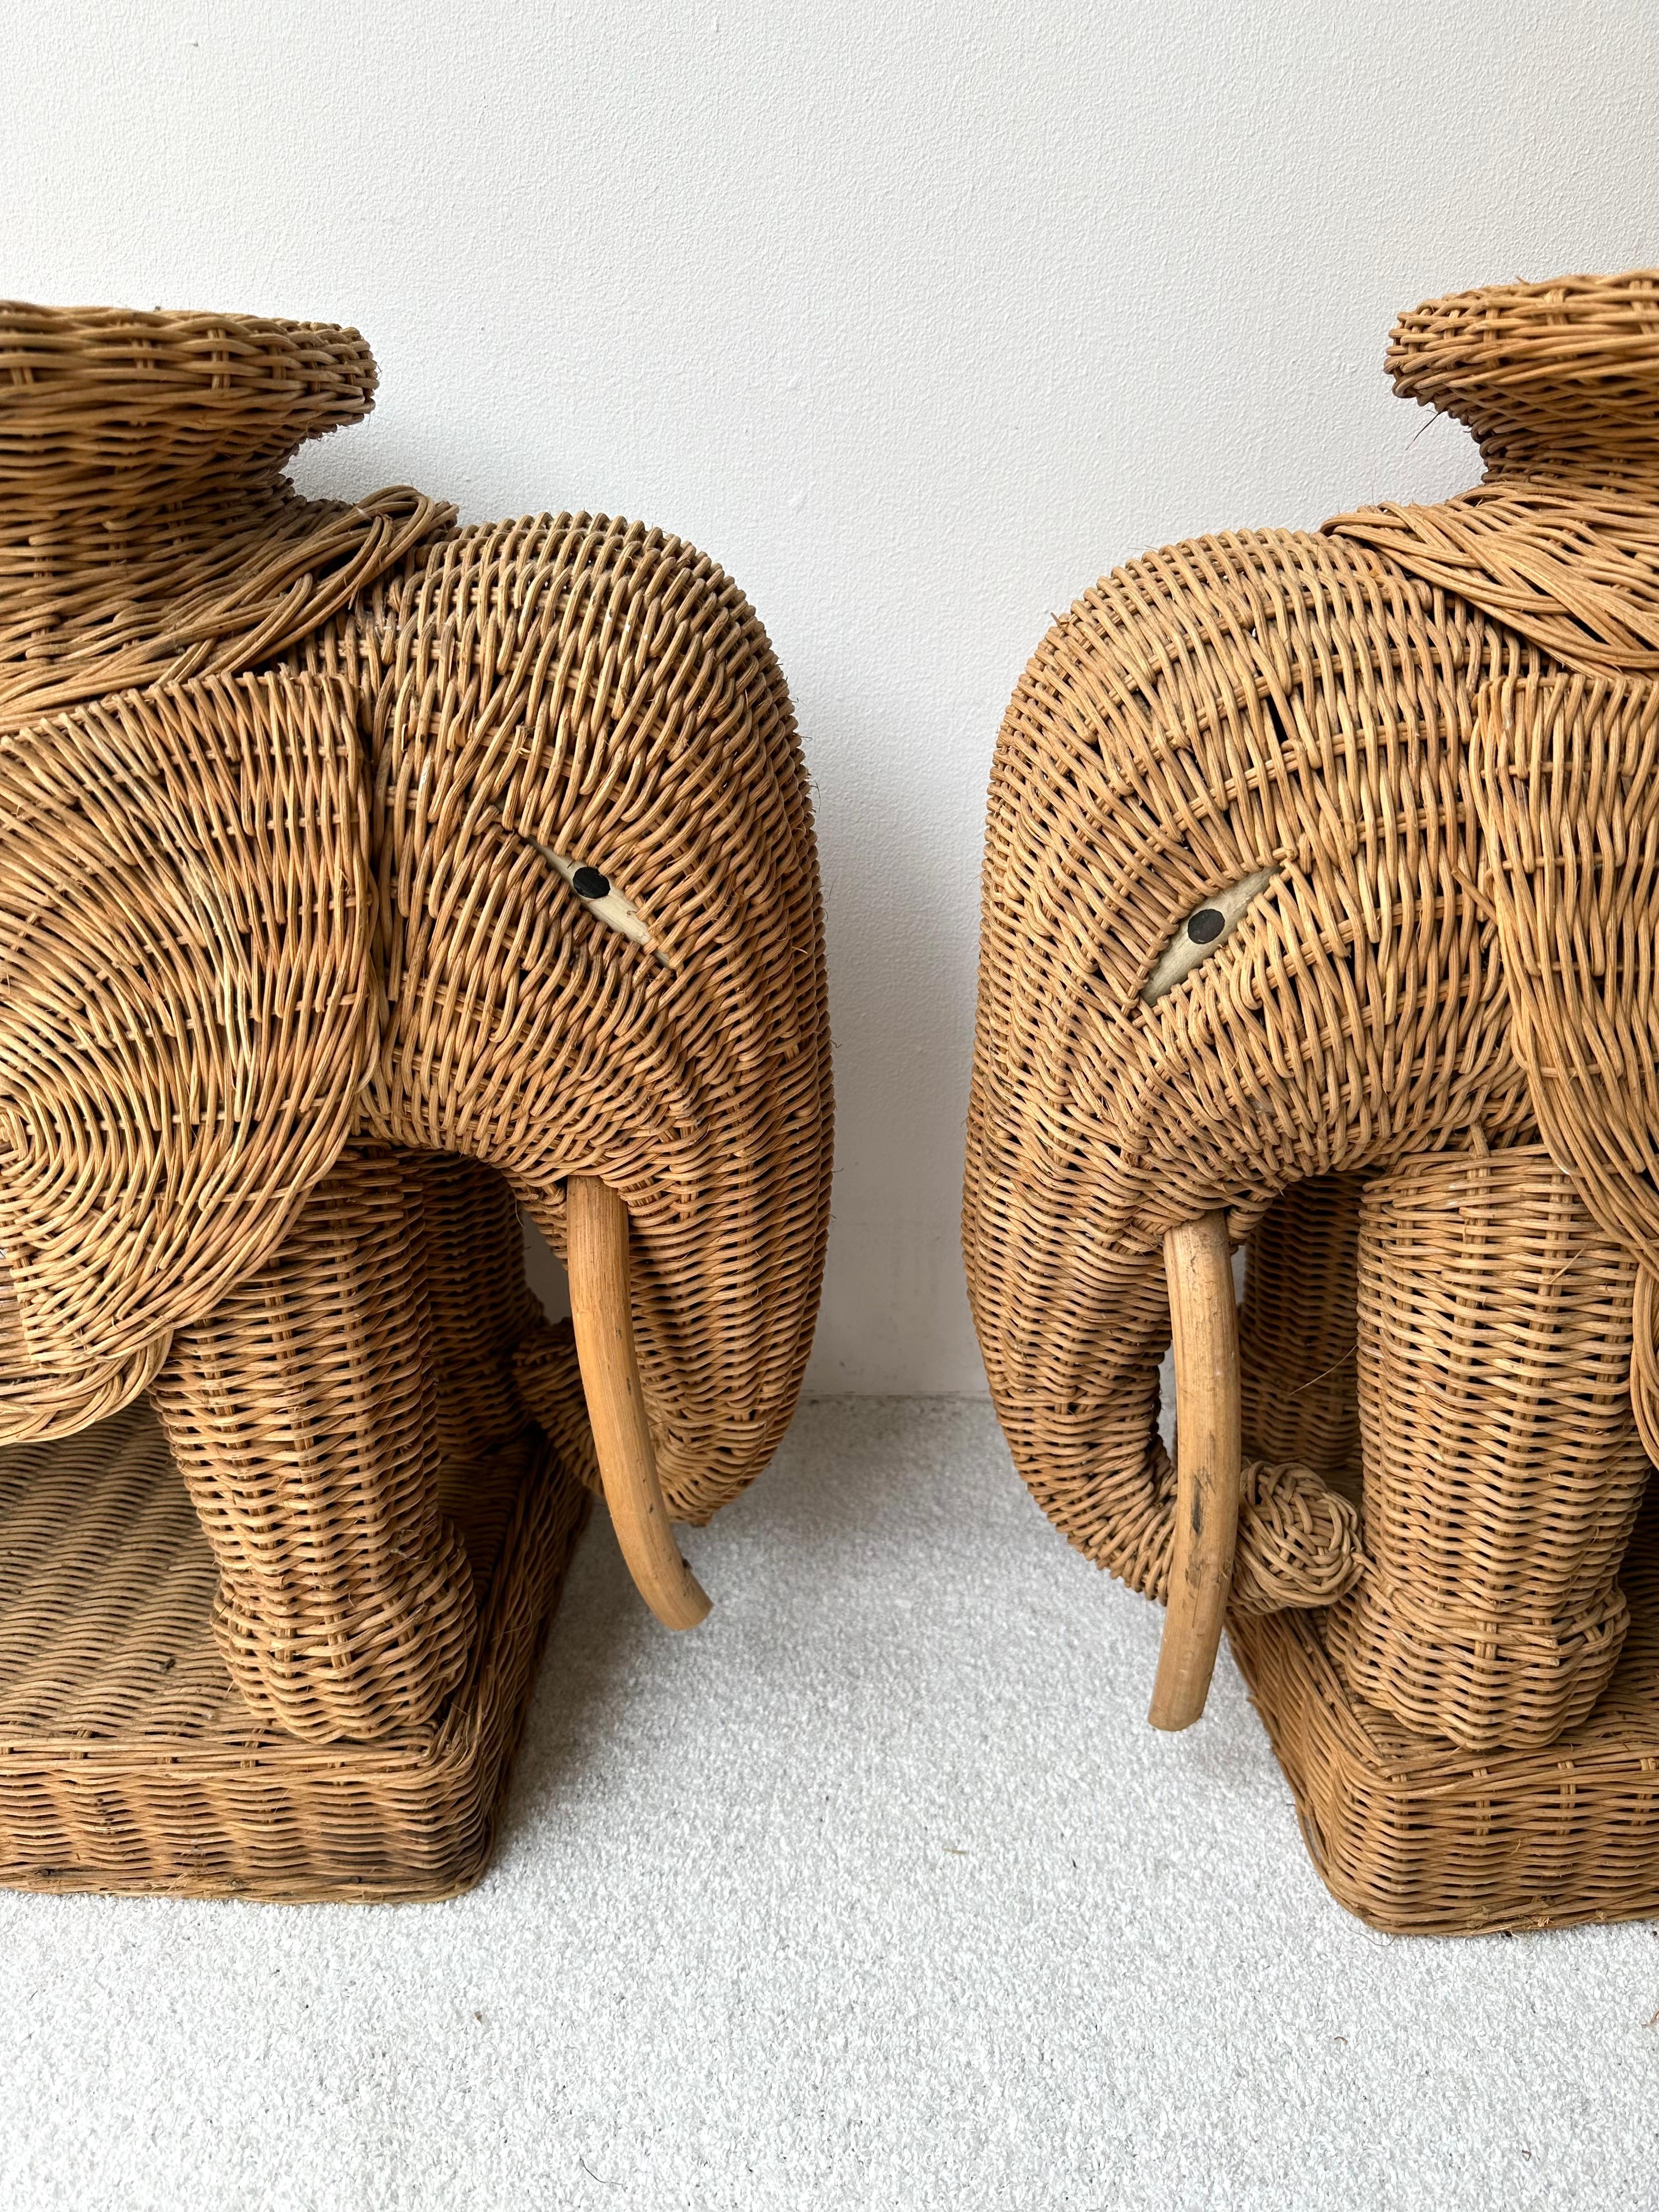 Pair or rattan animal elephant side, end, low, coffee, cocktail tables or nightstands. Artisanal work in the style of Mario Lopez Torres, Galerie Maison & Jardin, Jansen, Dal Vera, Vivai Del Sud palm tree, Hollywood Regency.